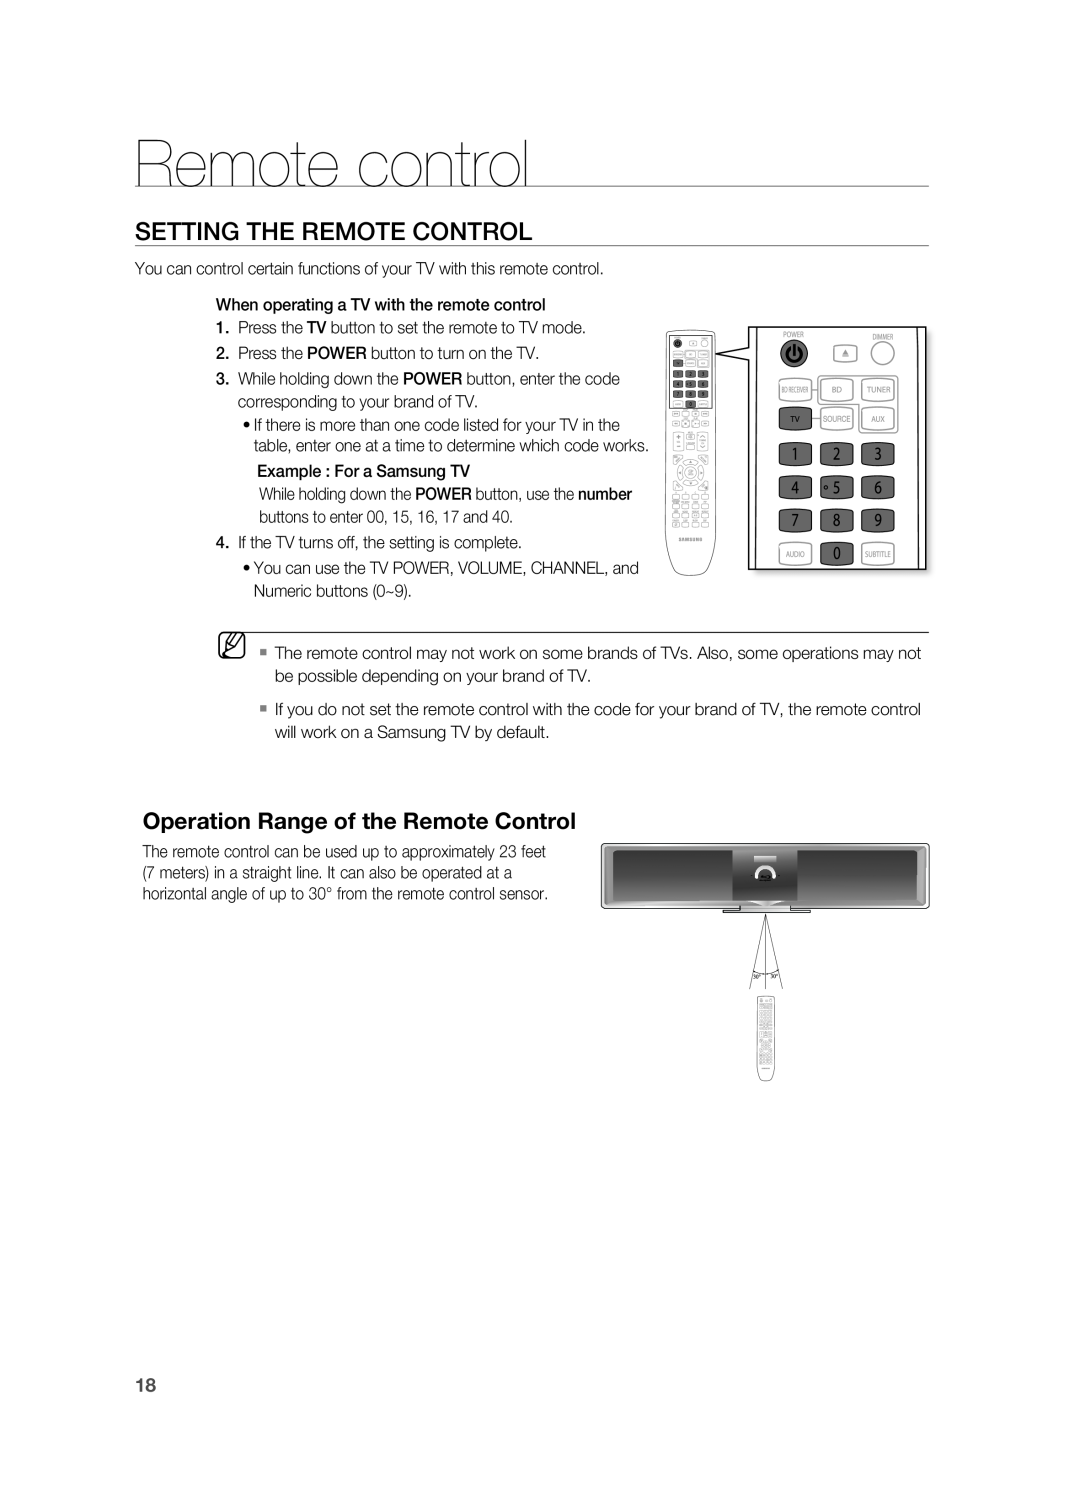 Samsung HT-BD8200 user manual Setting The Remote Control, Operation Range of the Remote Control, Remote control, M  